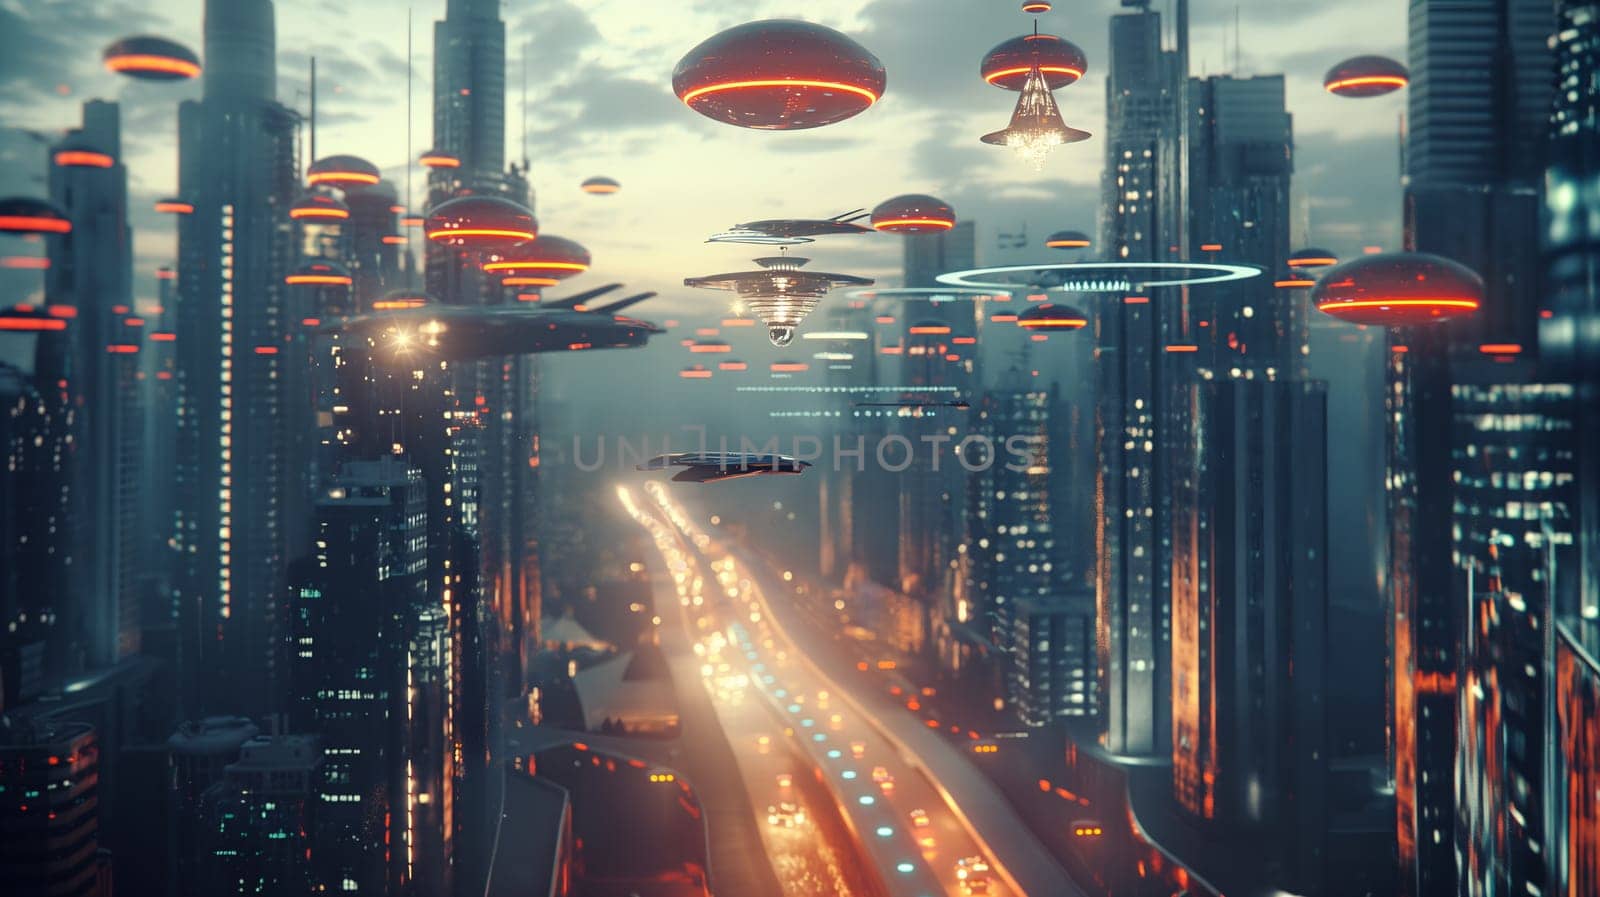 Futuristic City at Dusk With Flying Vehicles by chrisroll